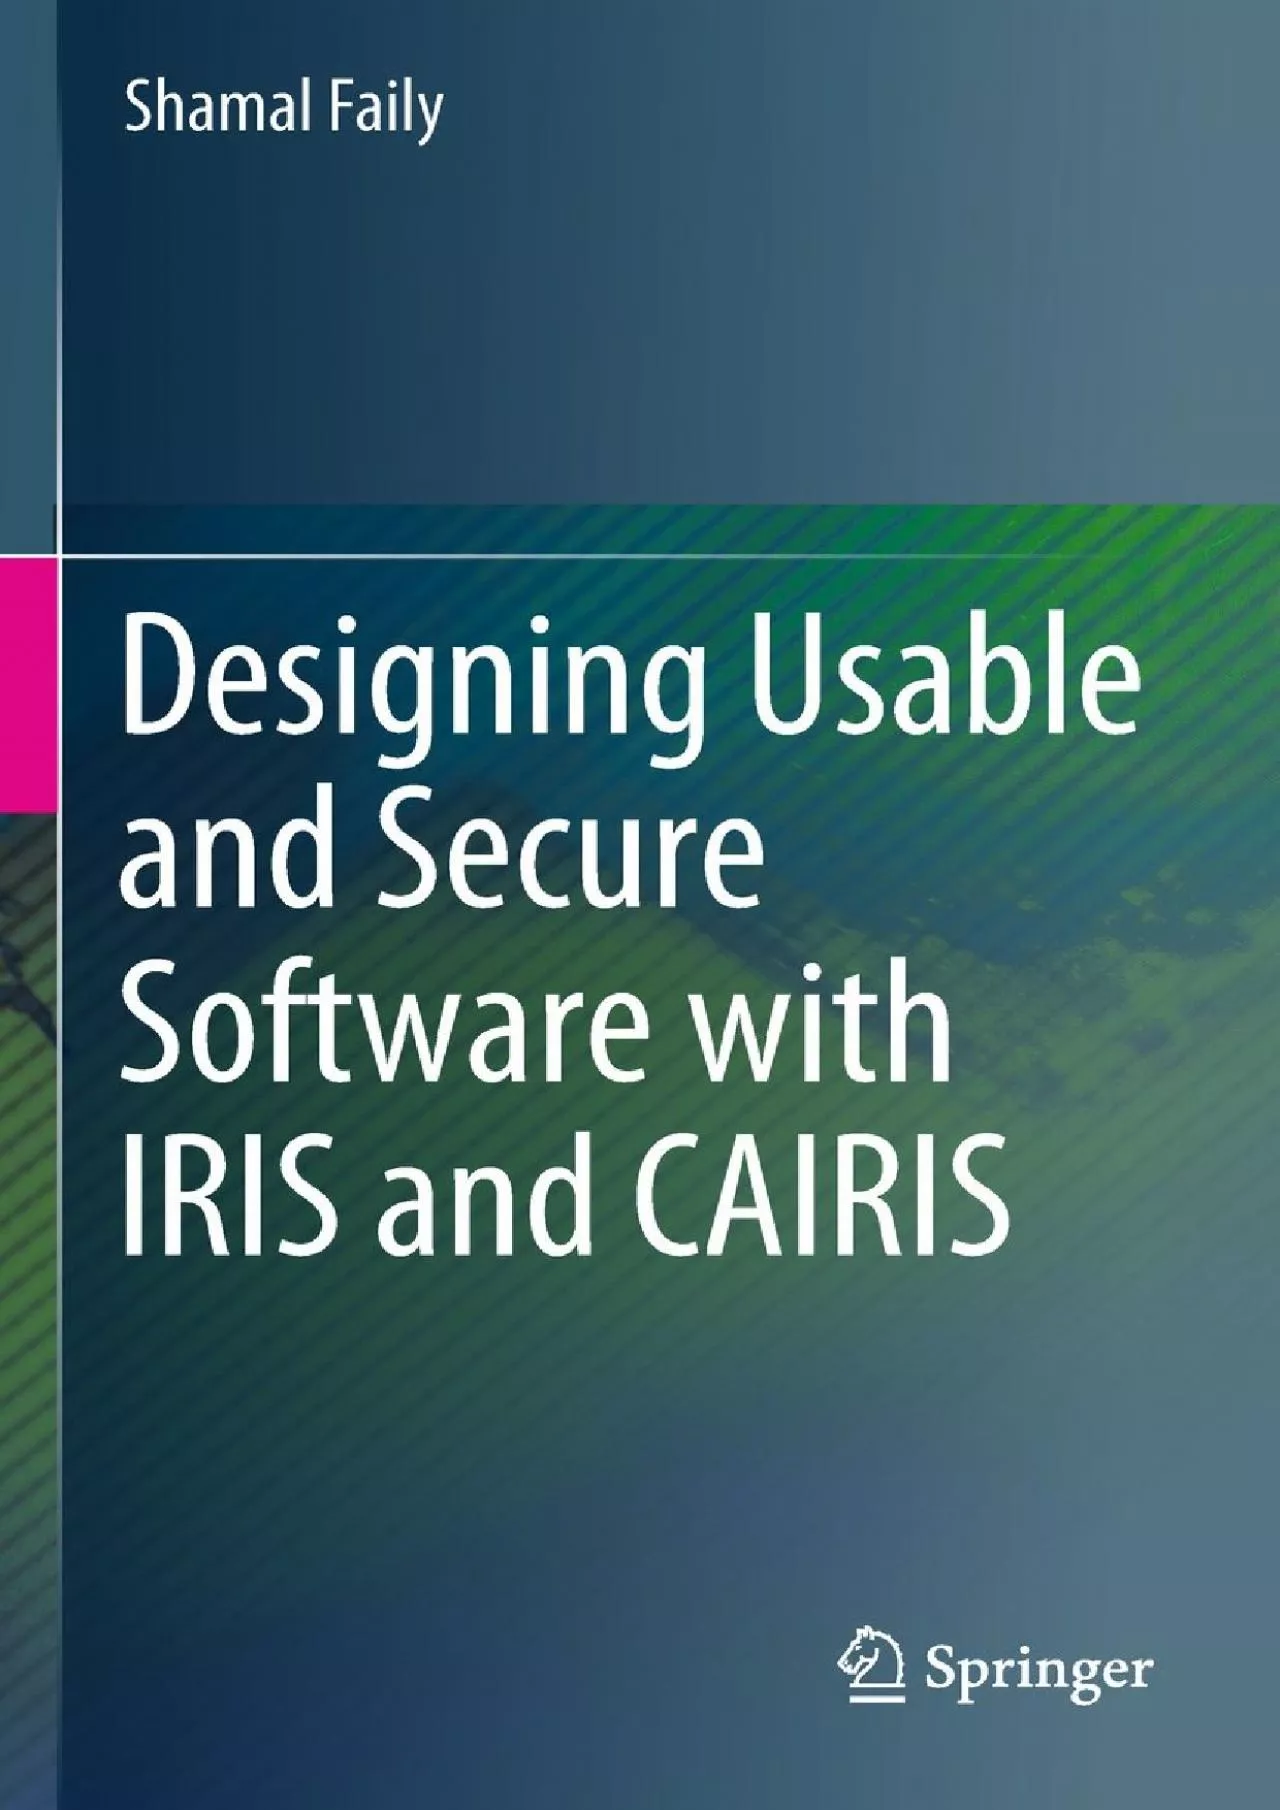 (BOOS)-Designing Usable and Secure Software with IRIS and CAIRIS